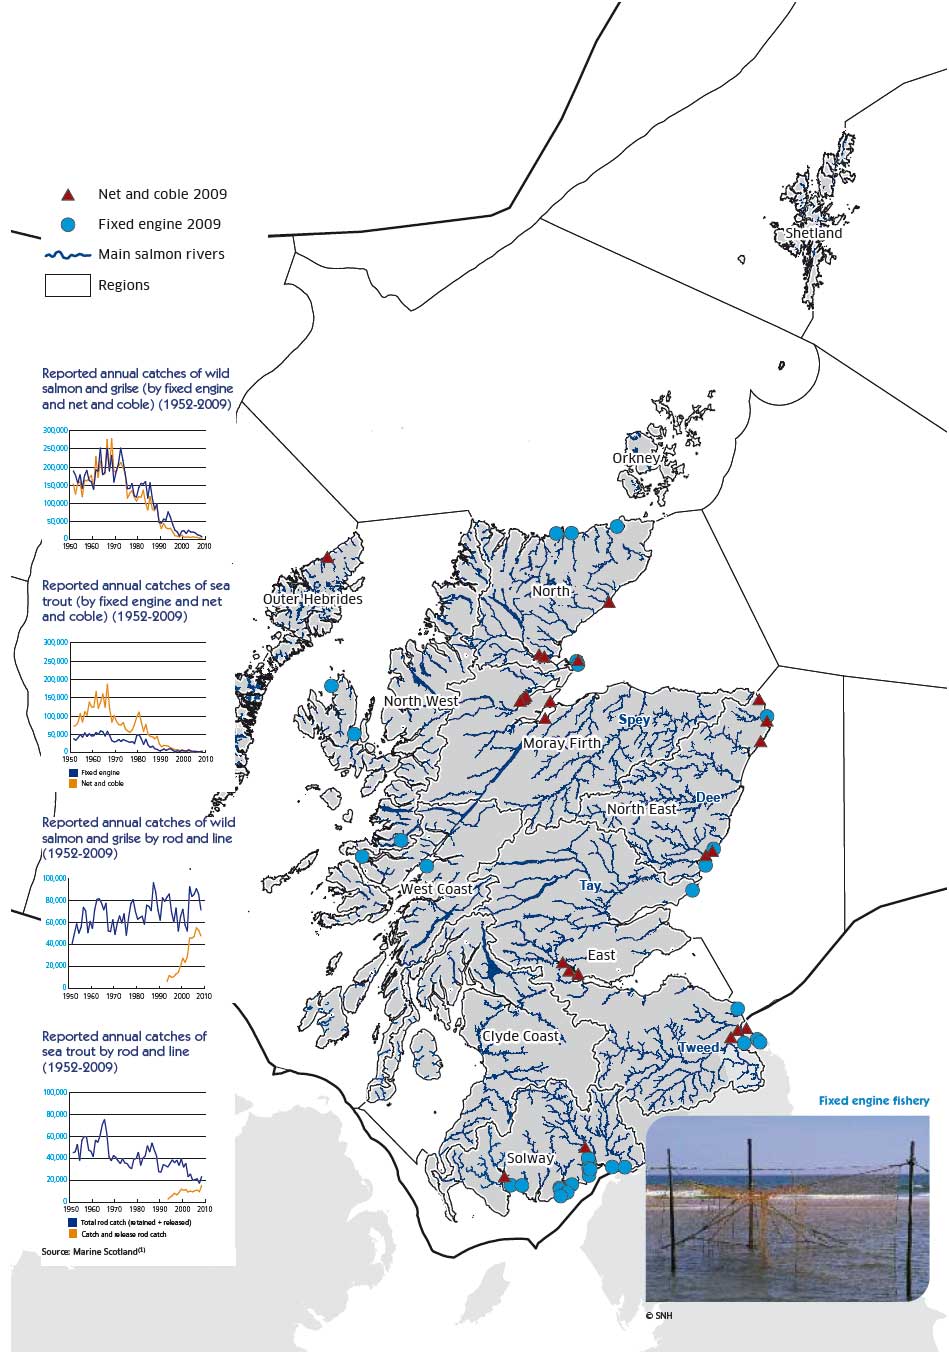 Scottish salmon rivers and salmon and sea trout net fisheries reporting catches in 2009